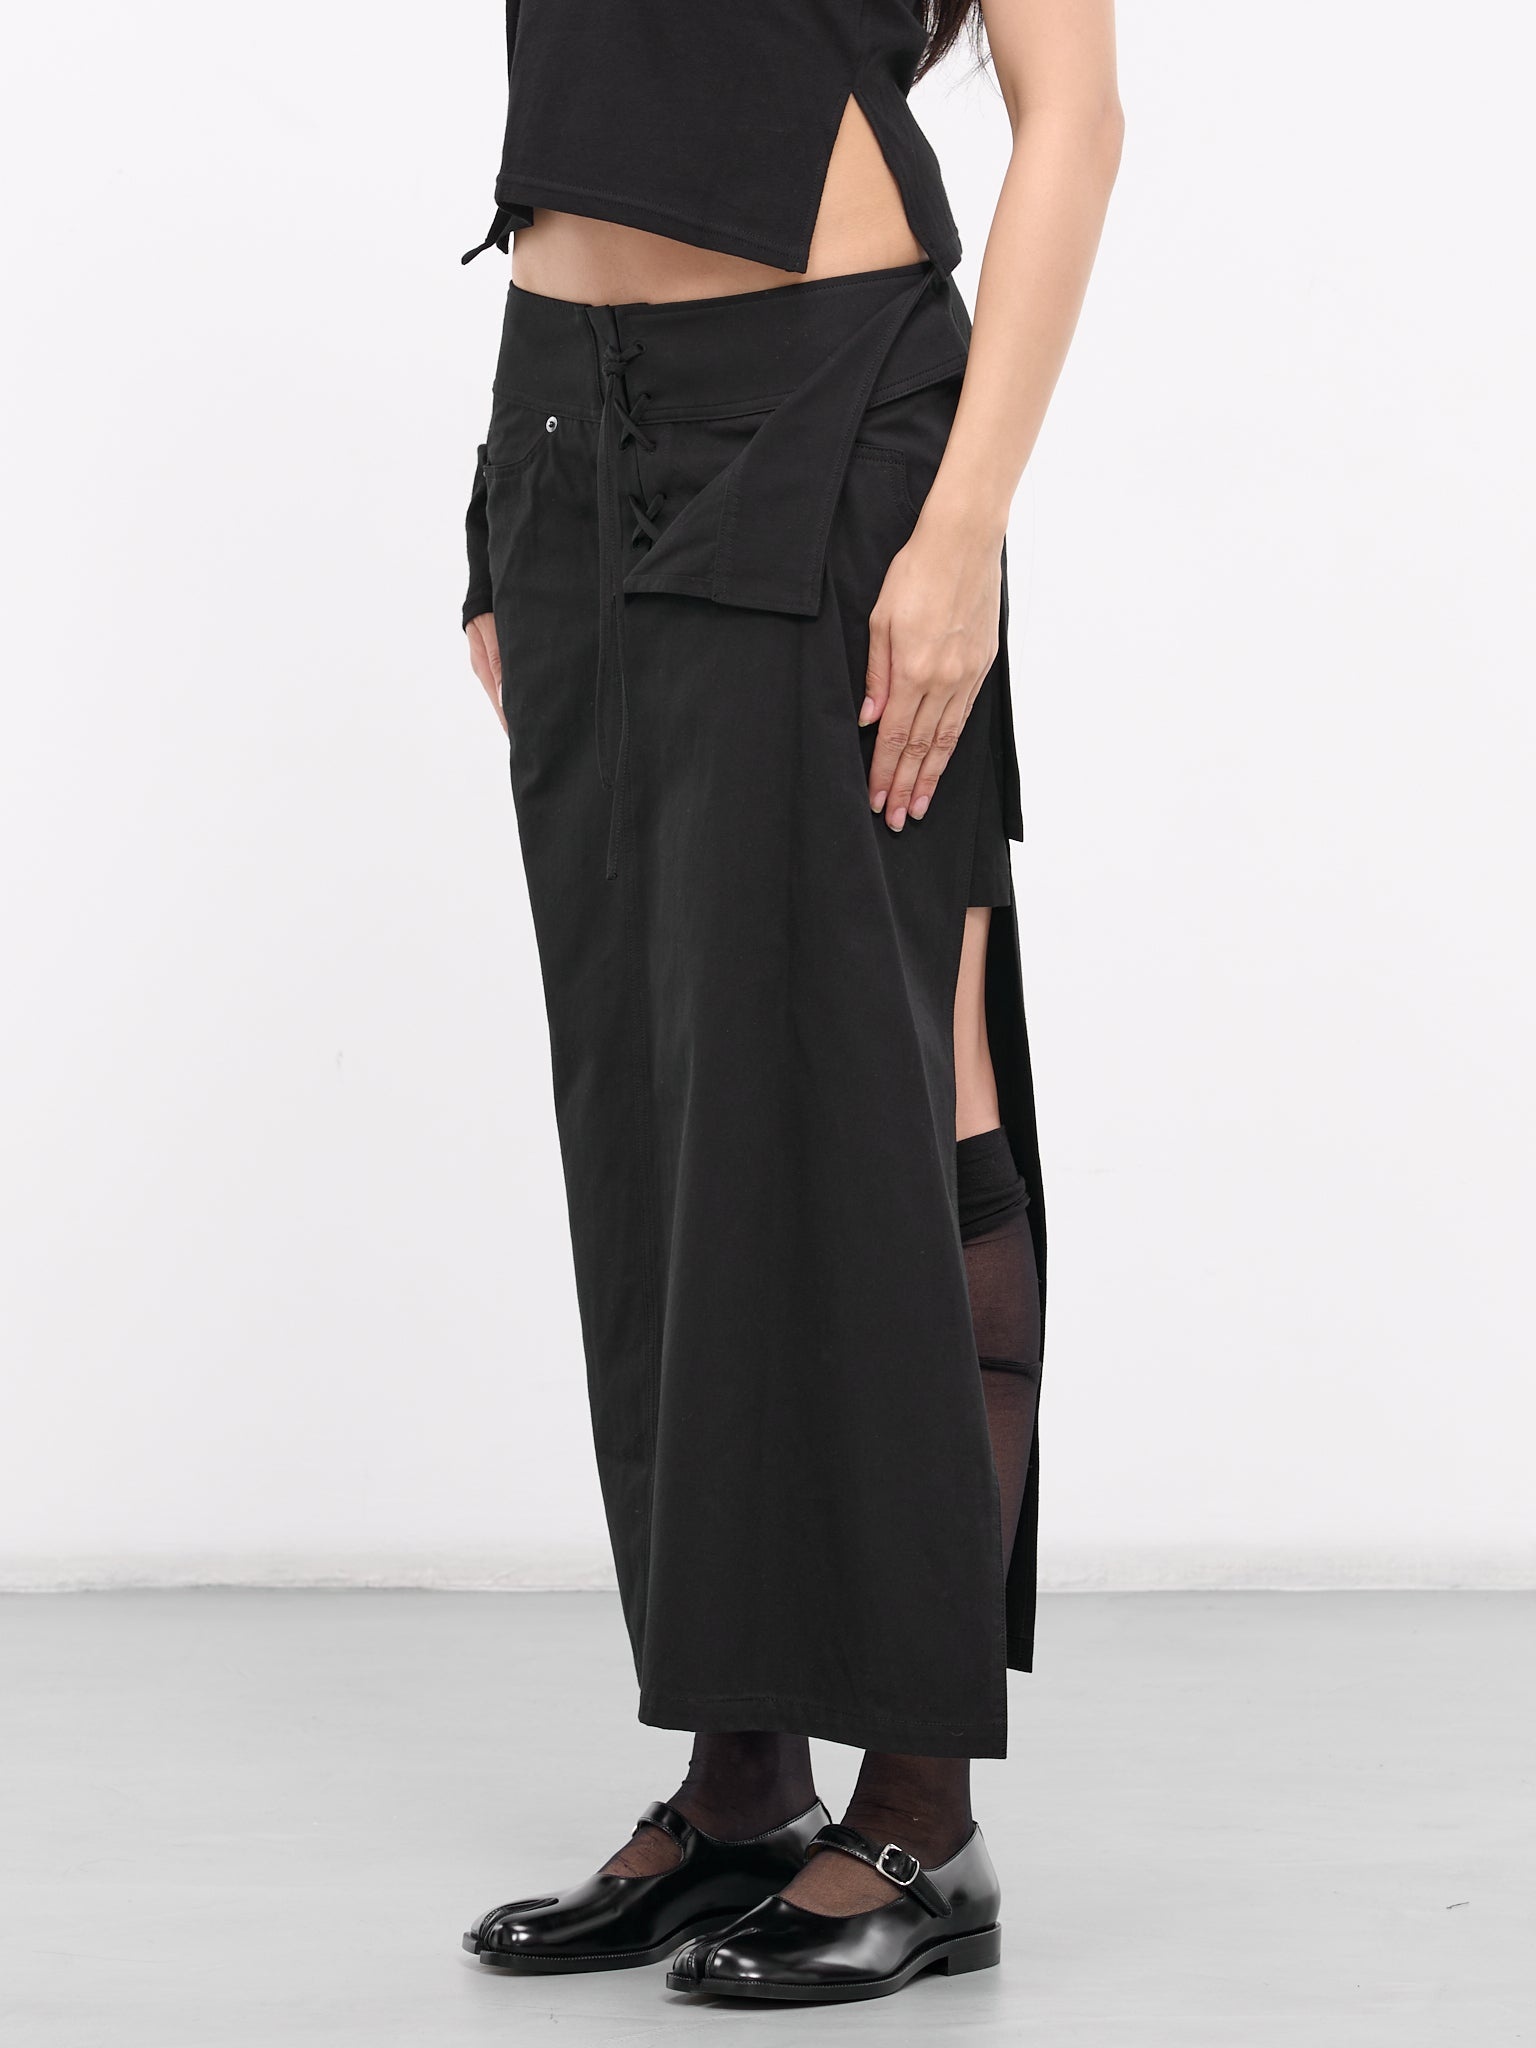 Lace-Up Maxi Skirt - 2